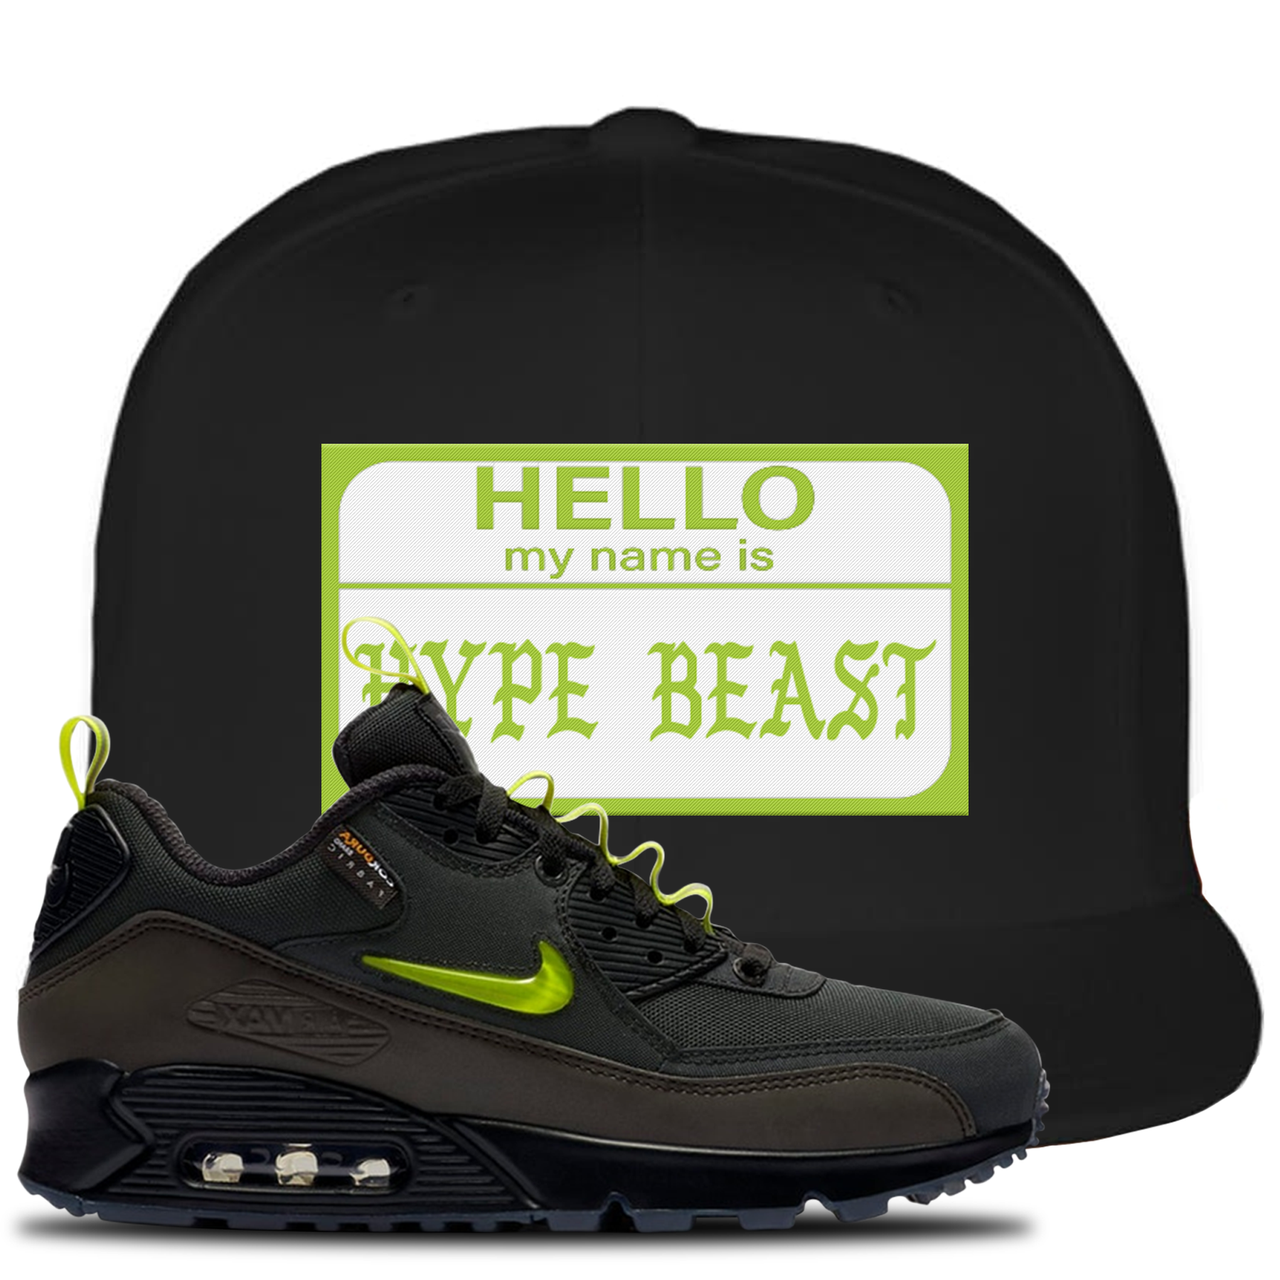 The Basement X Air Max 90 Manchester Hello My Name is Hype Beast Black Sneaker Hook Up Snapback Hat